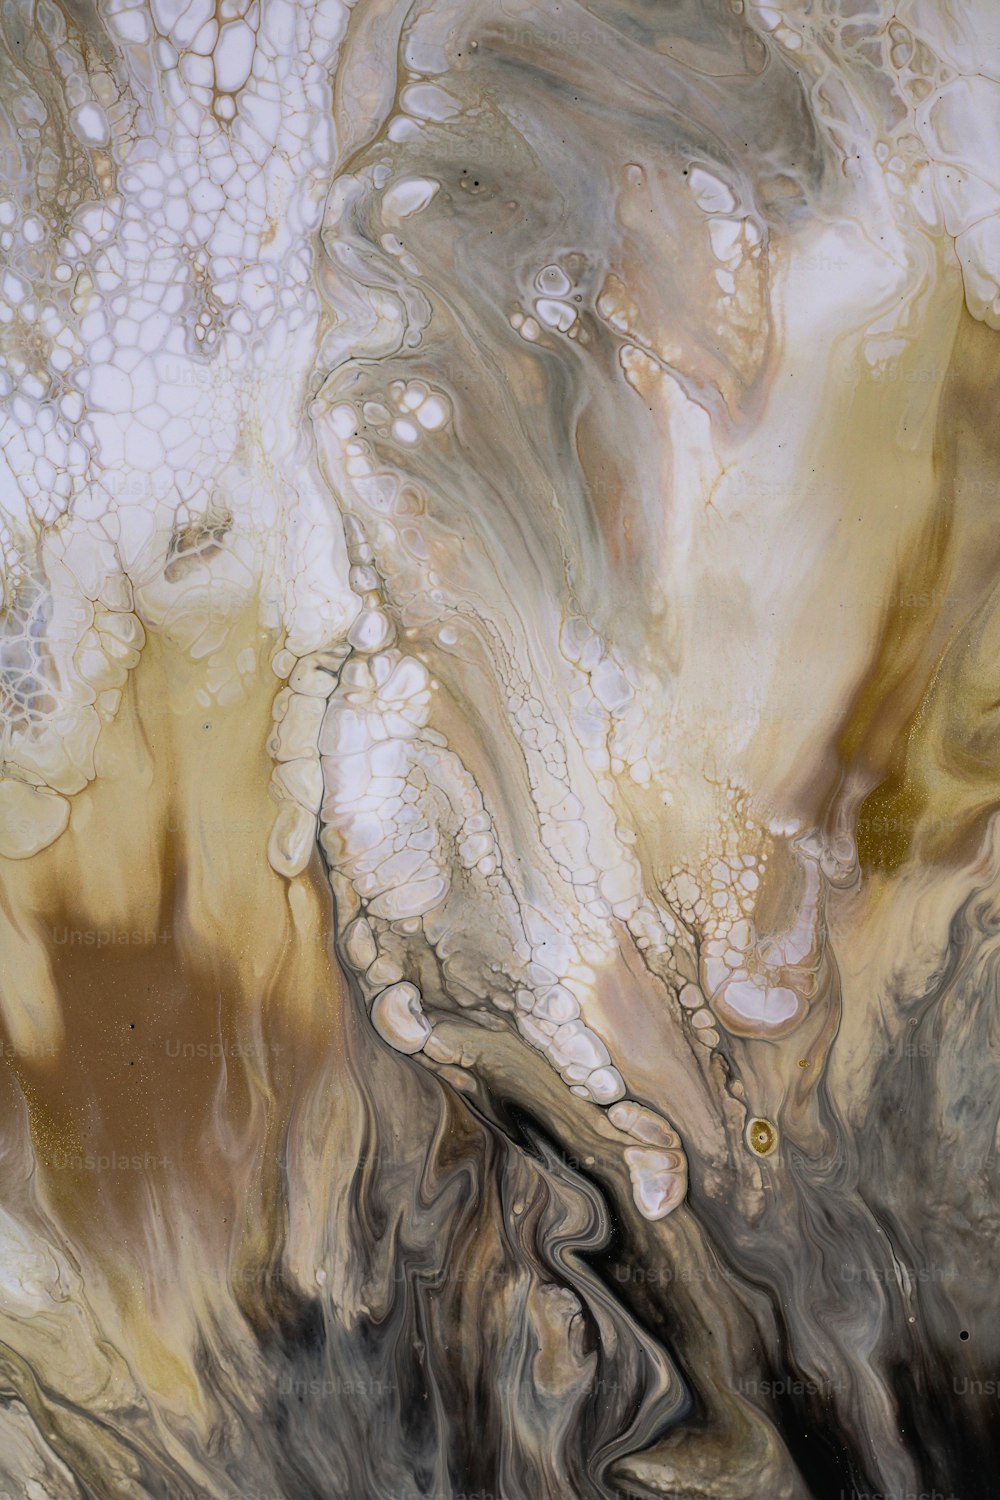 a close up of an abstract painting with brown and white colors